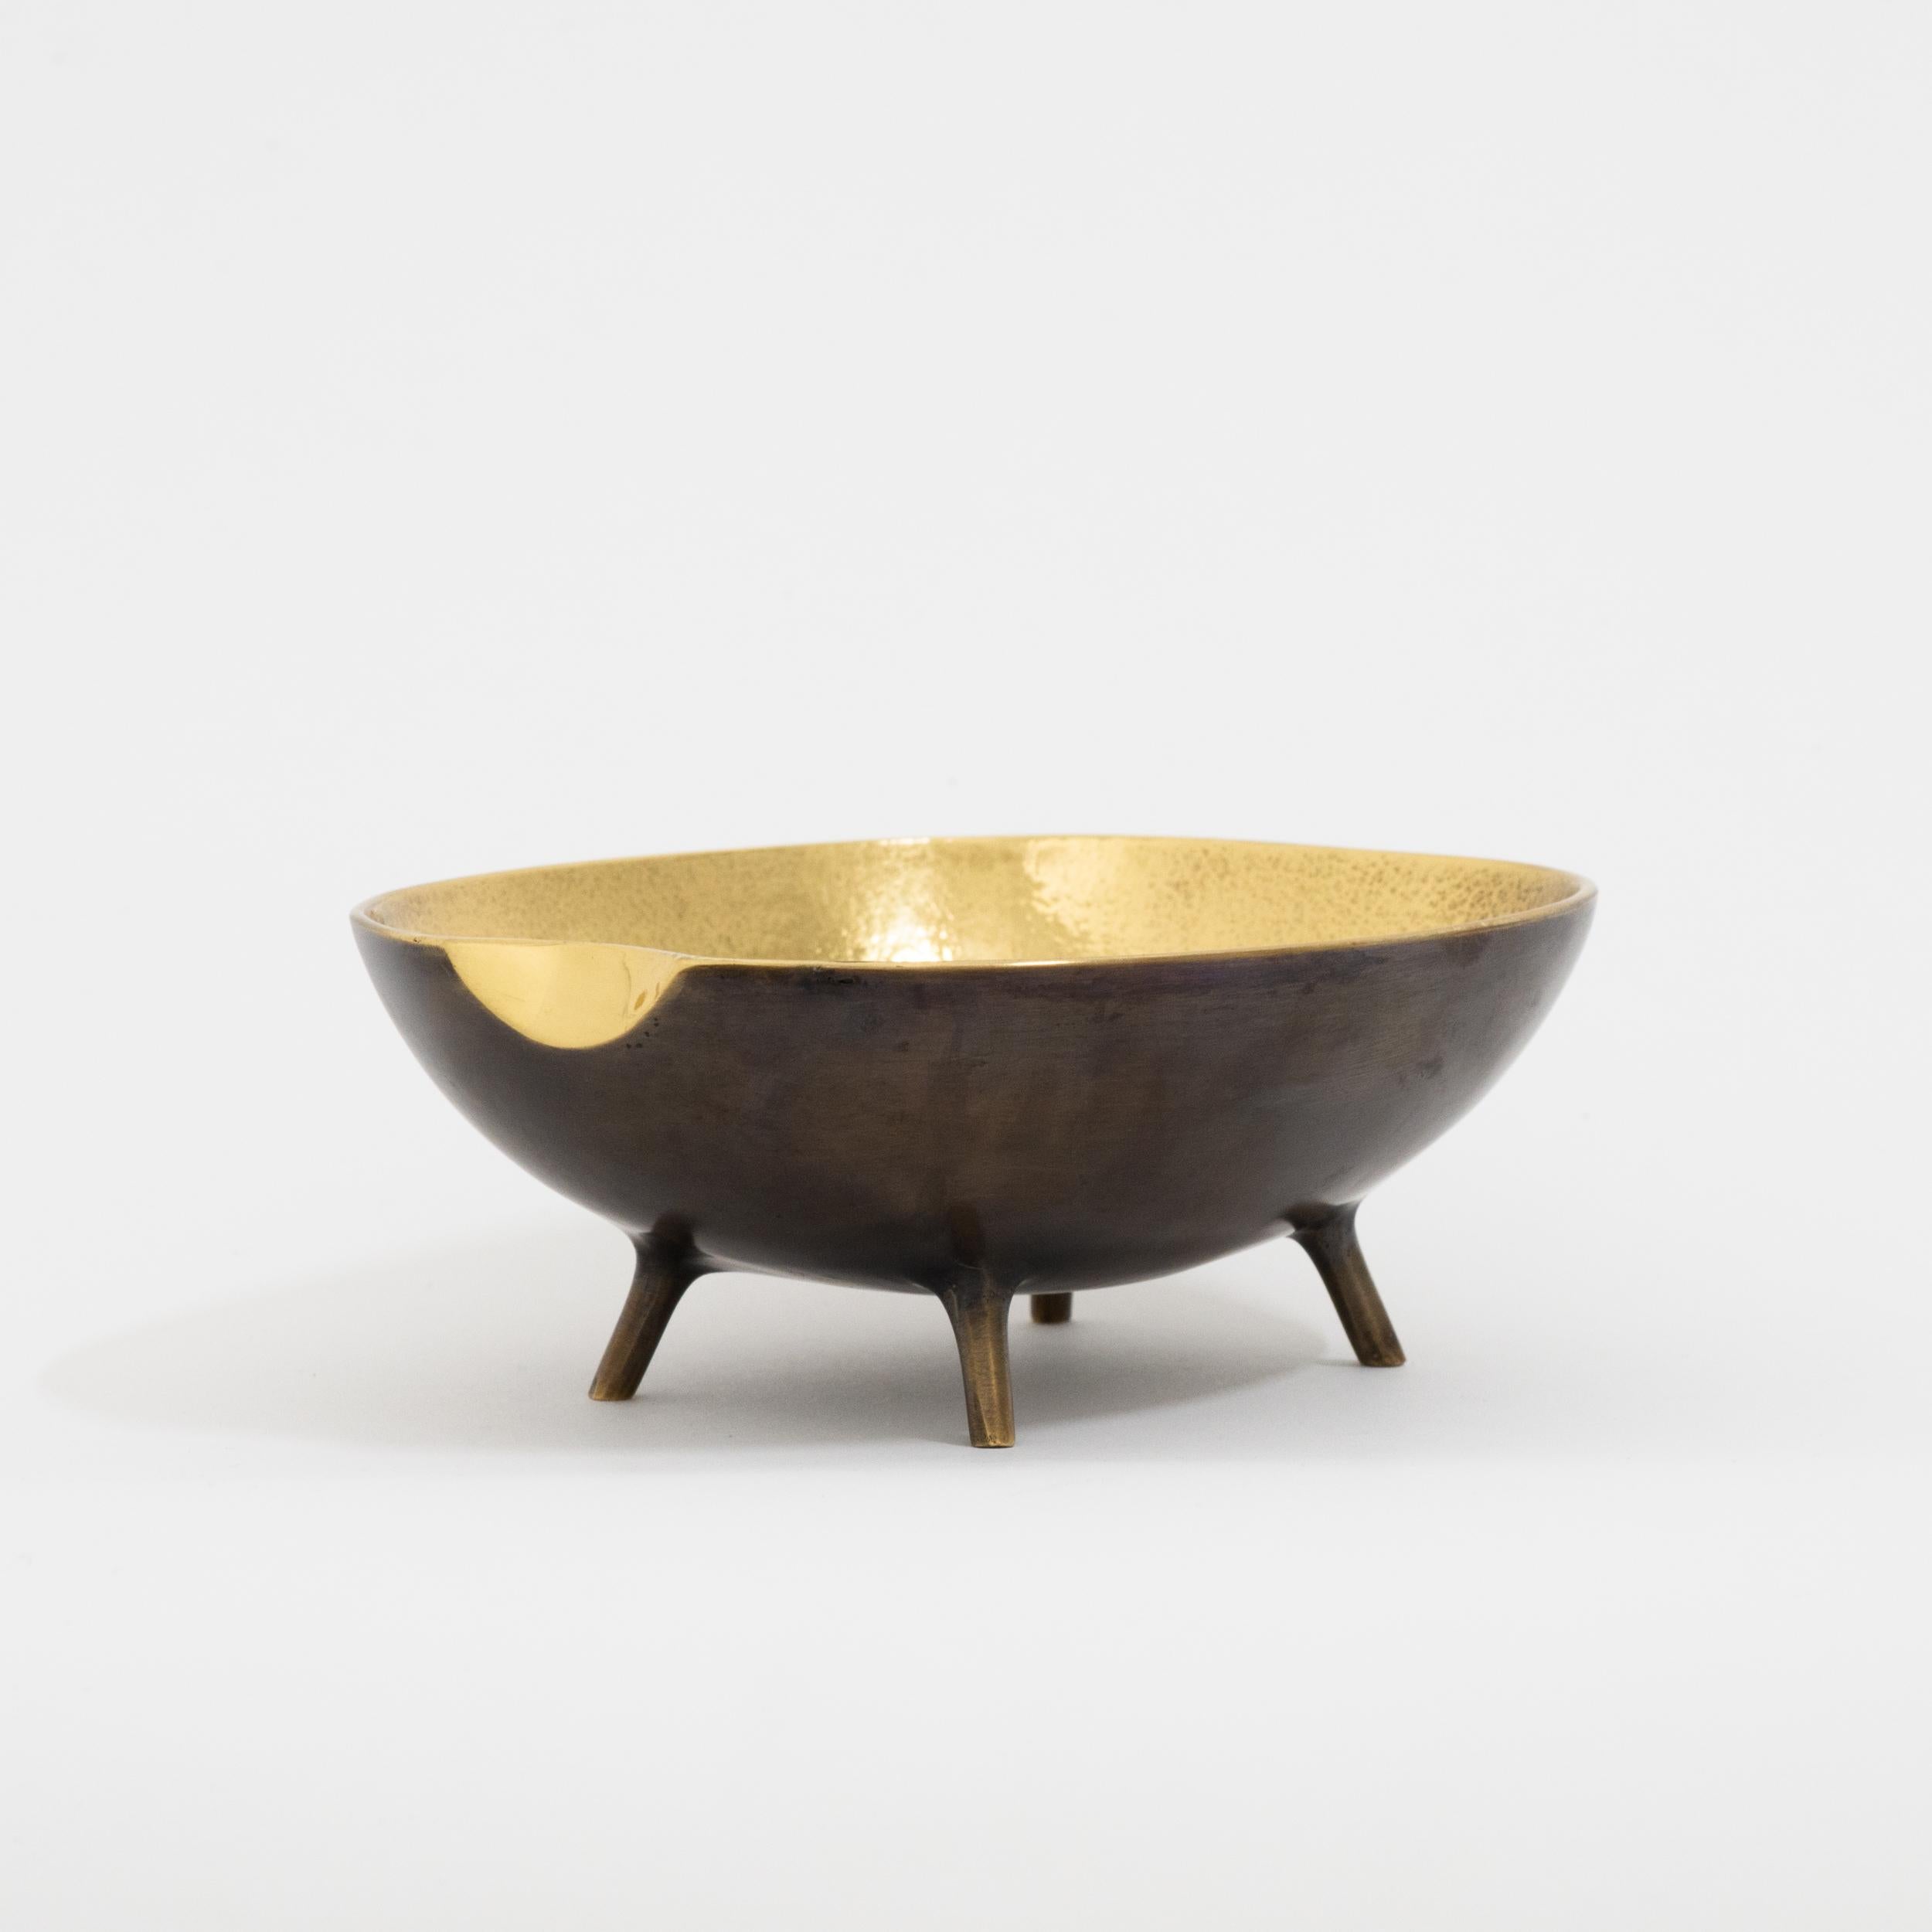 Handmade cast brass bowl legs with a bronze patina on the outside and textured polished brass on the inside.

Each of these charming, original and elegant bowls are handmade individually. Cast using very traditional techniques, the noble material is